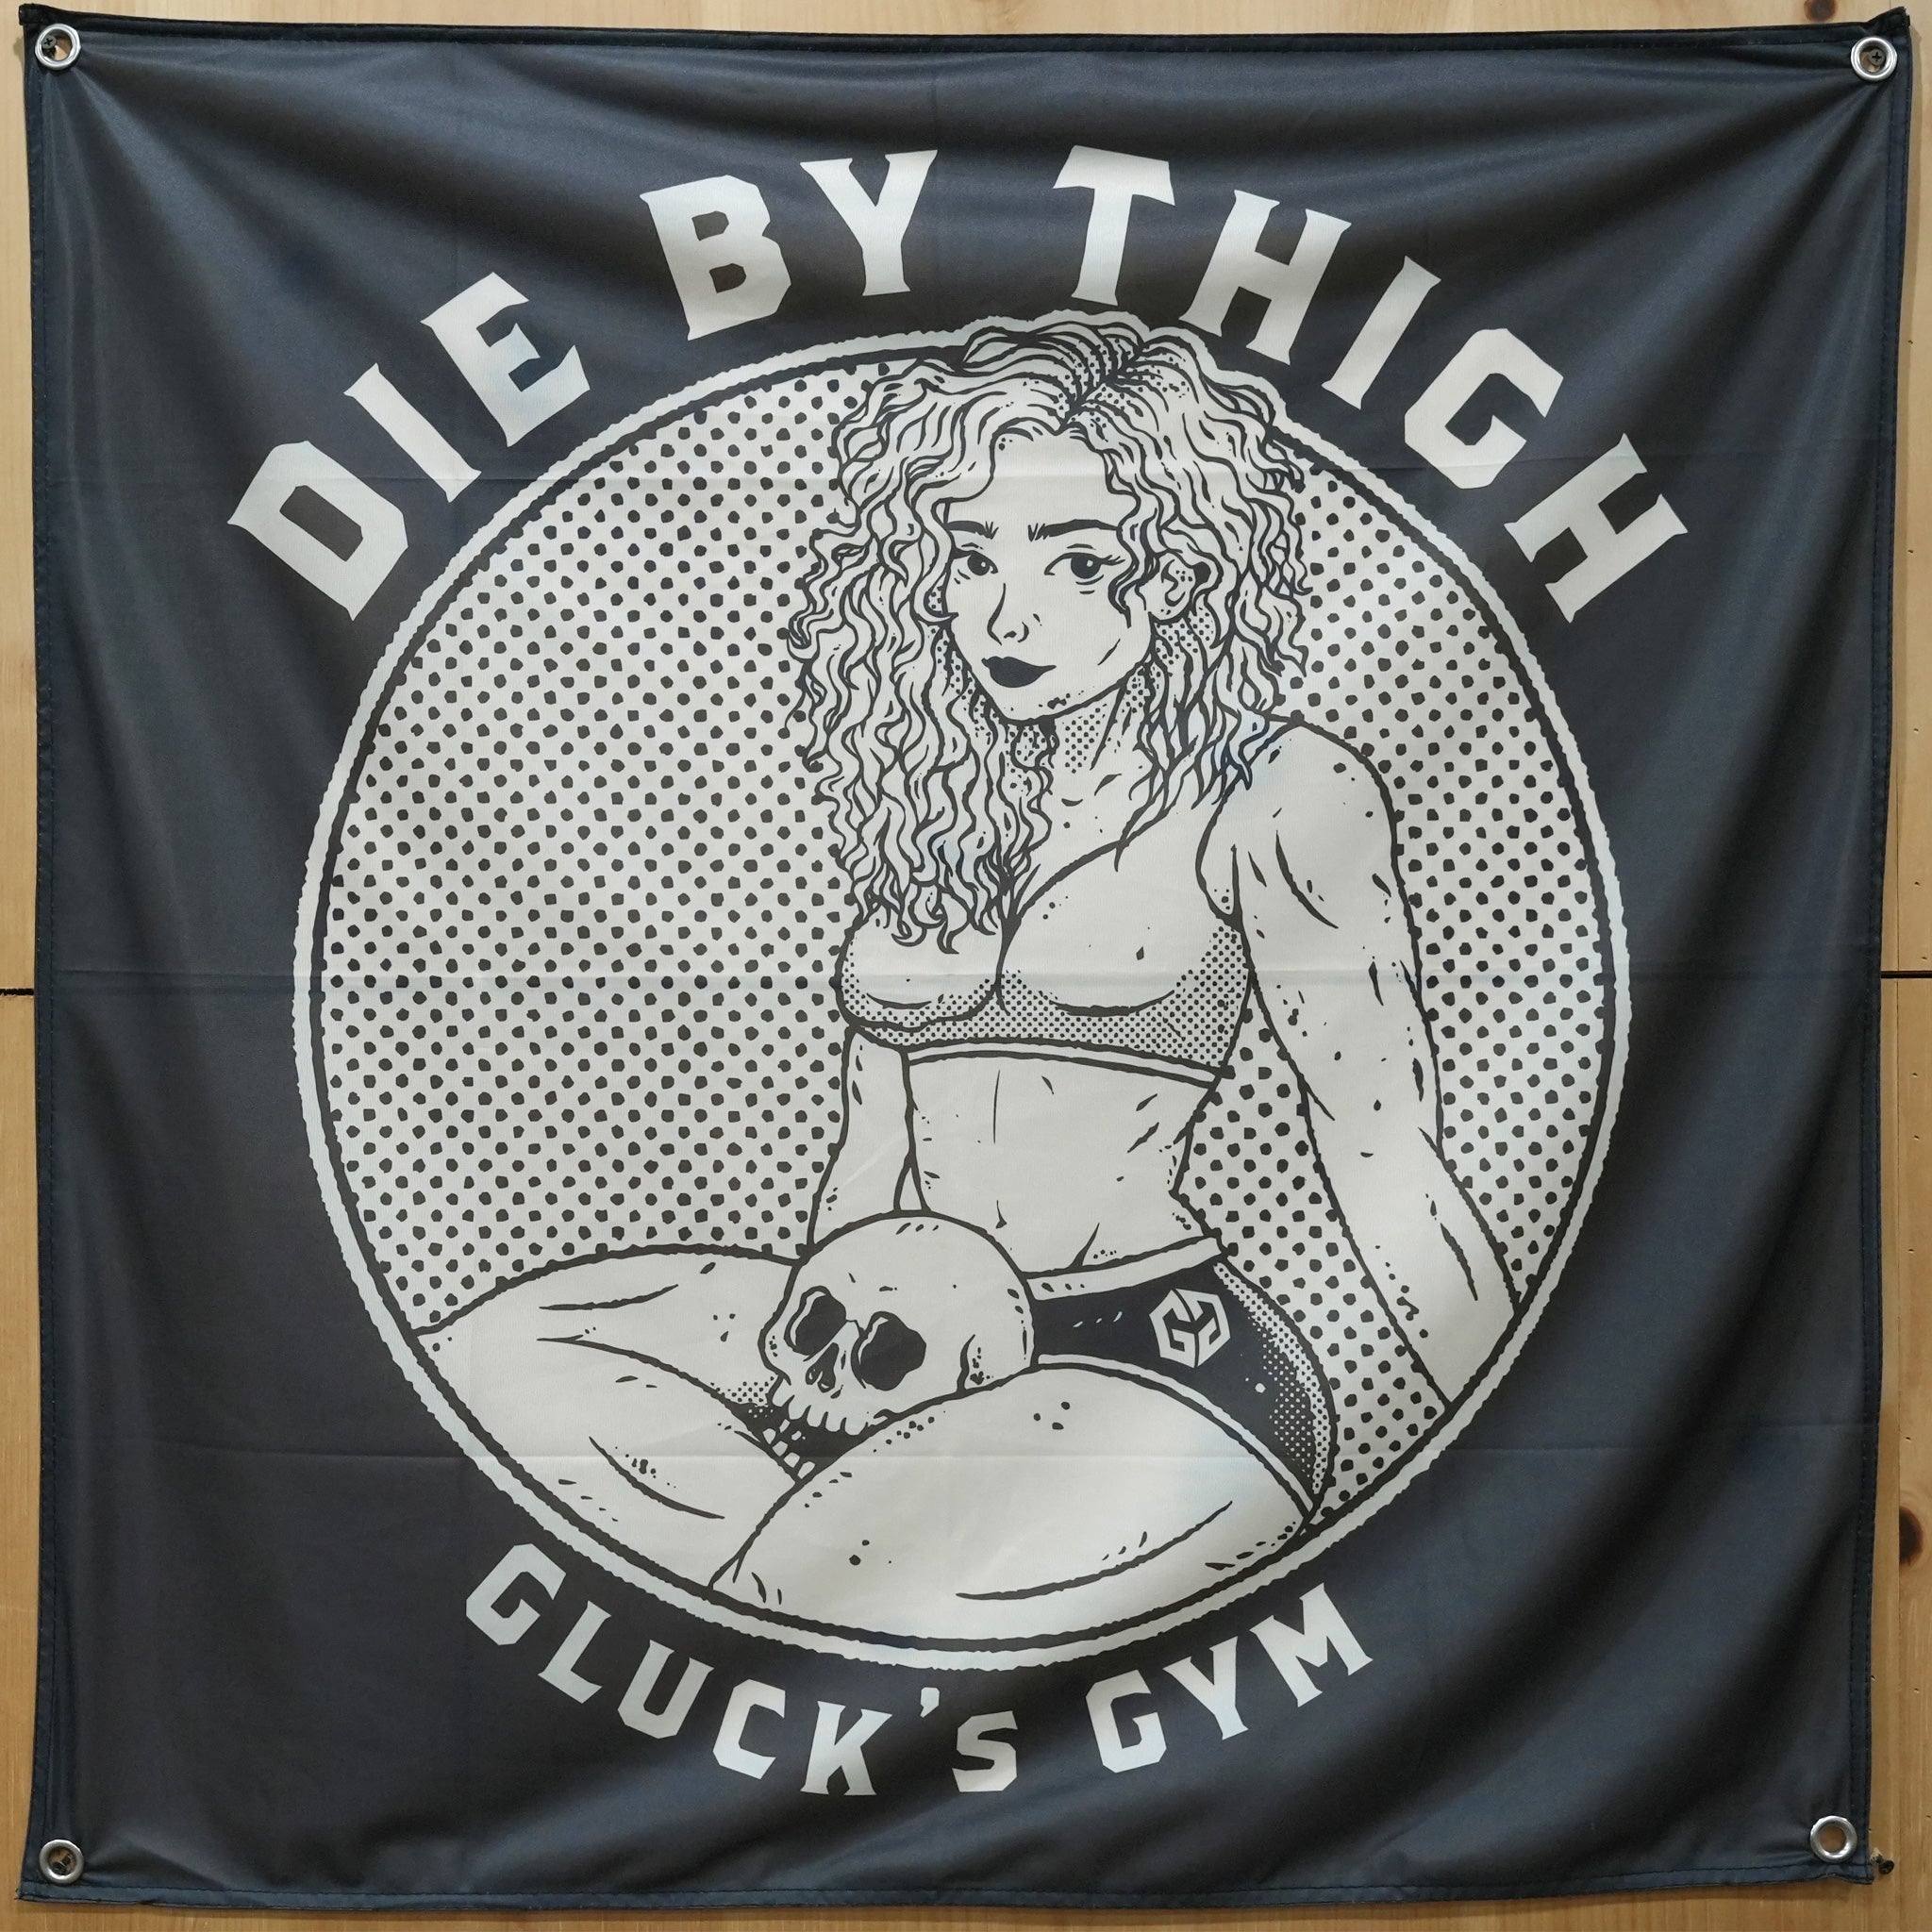 Die high between two thighs Patch